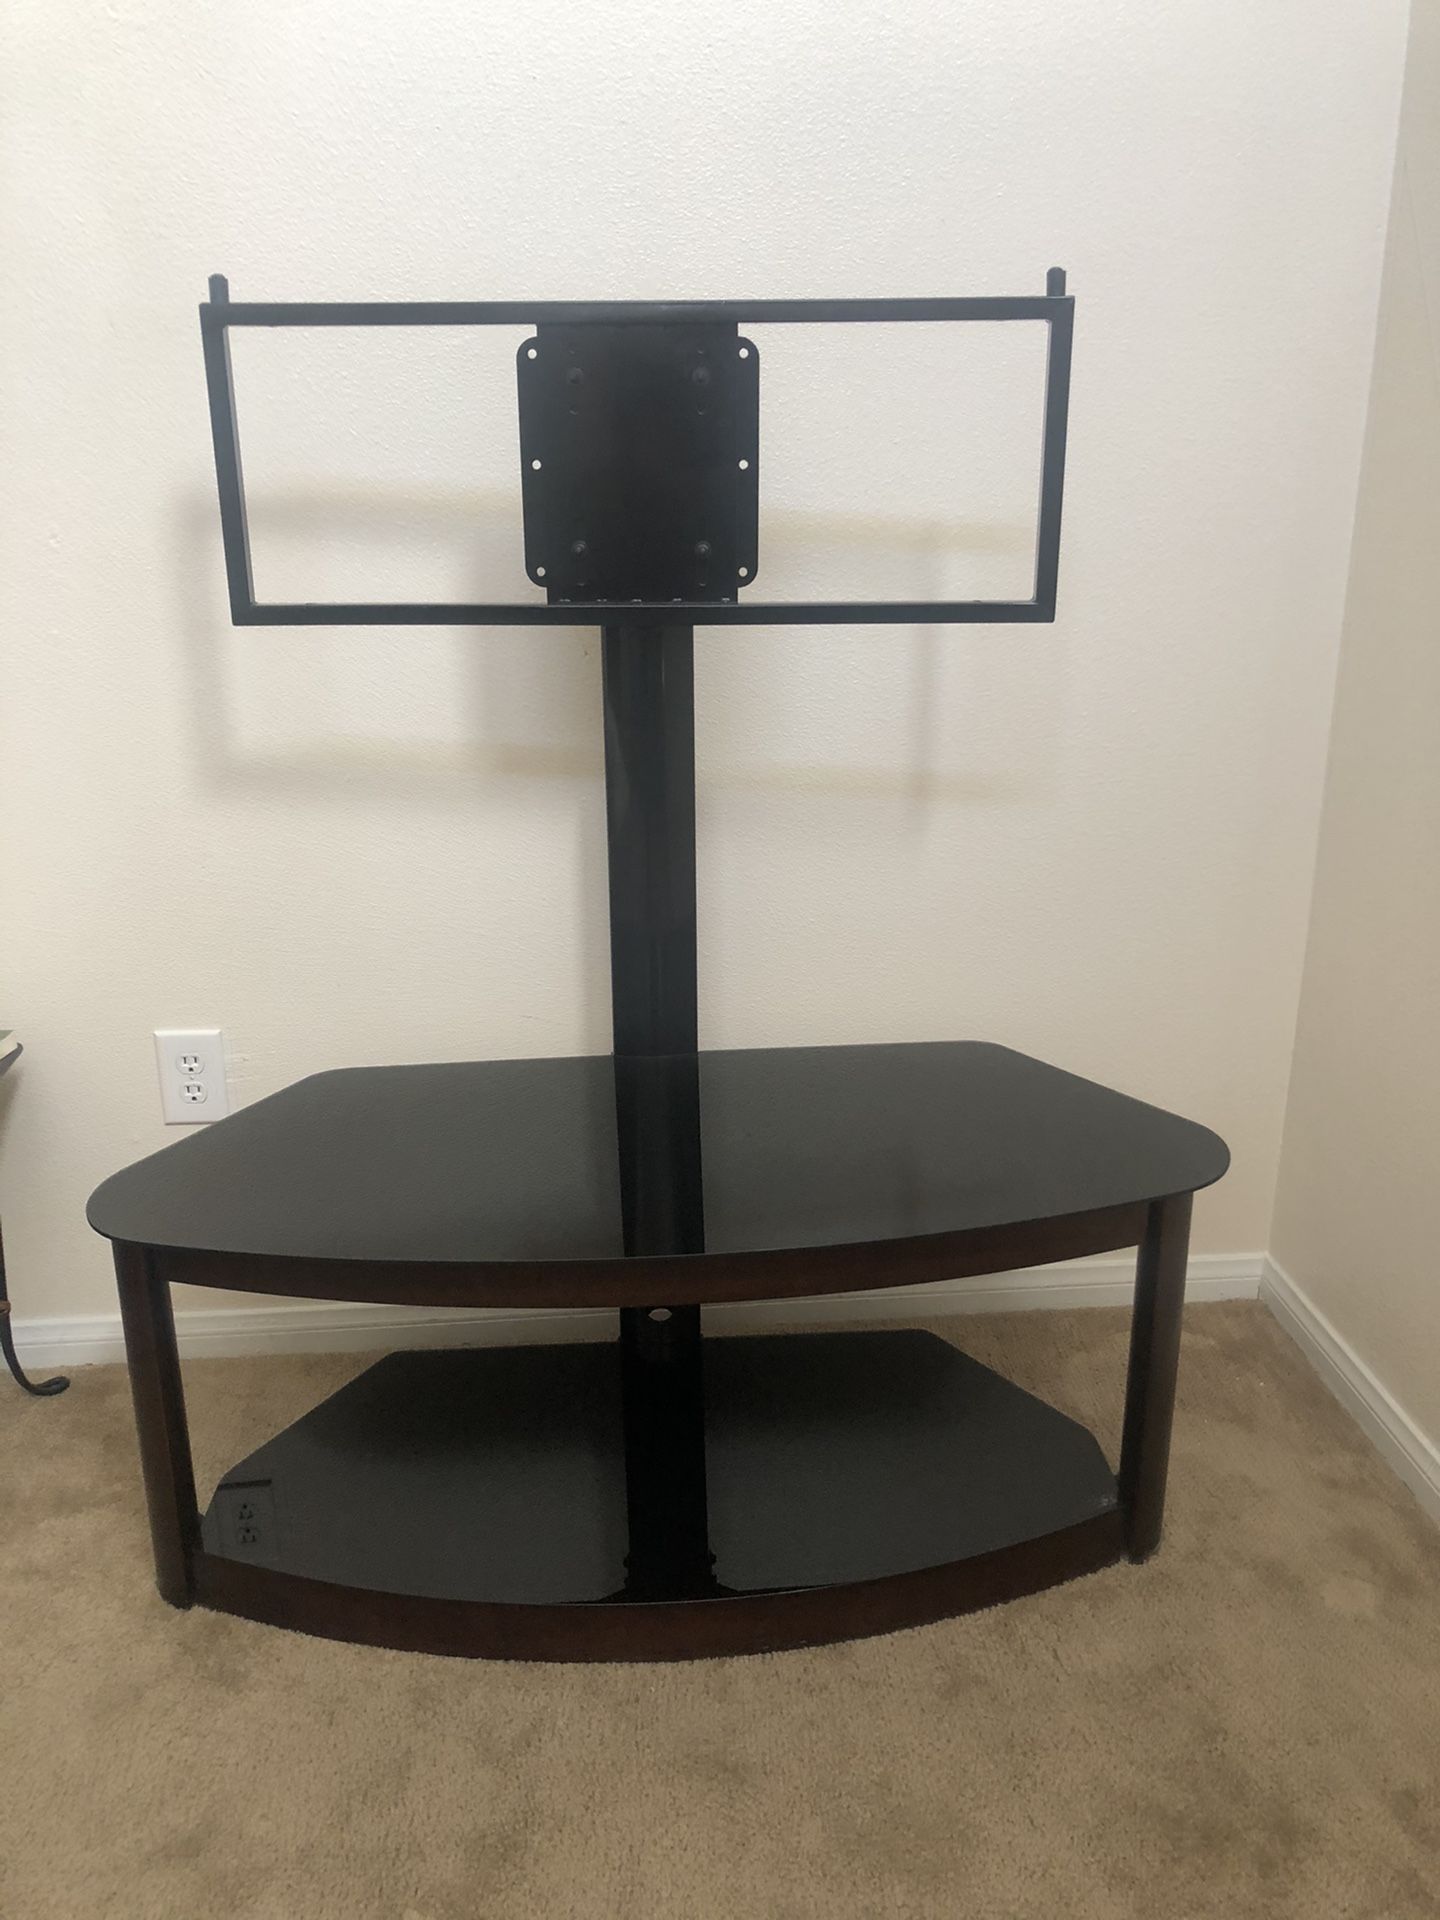 Tv stand for a 52 inch or smaller television